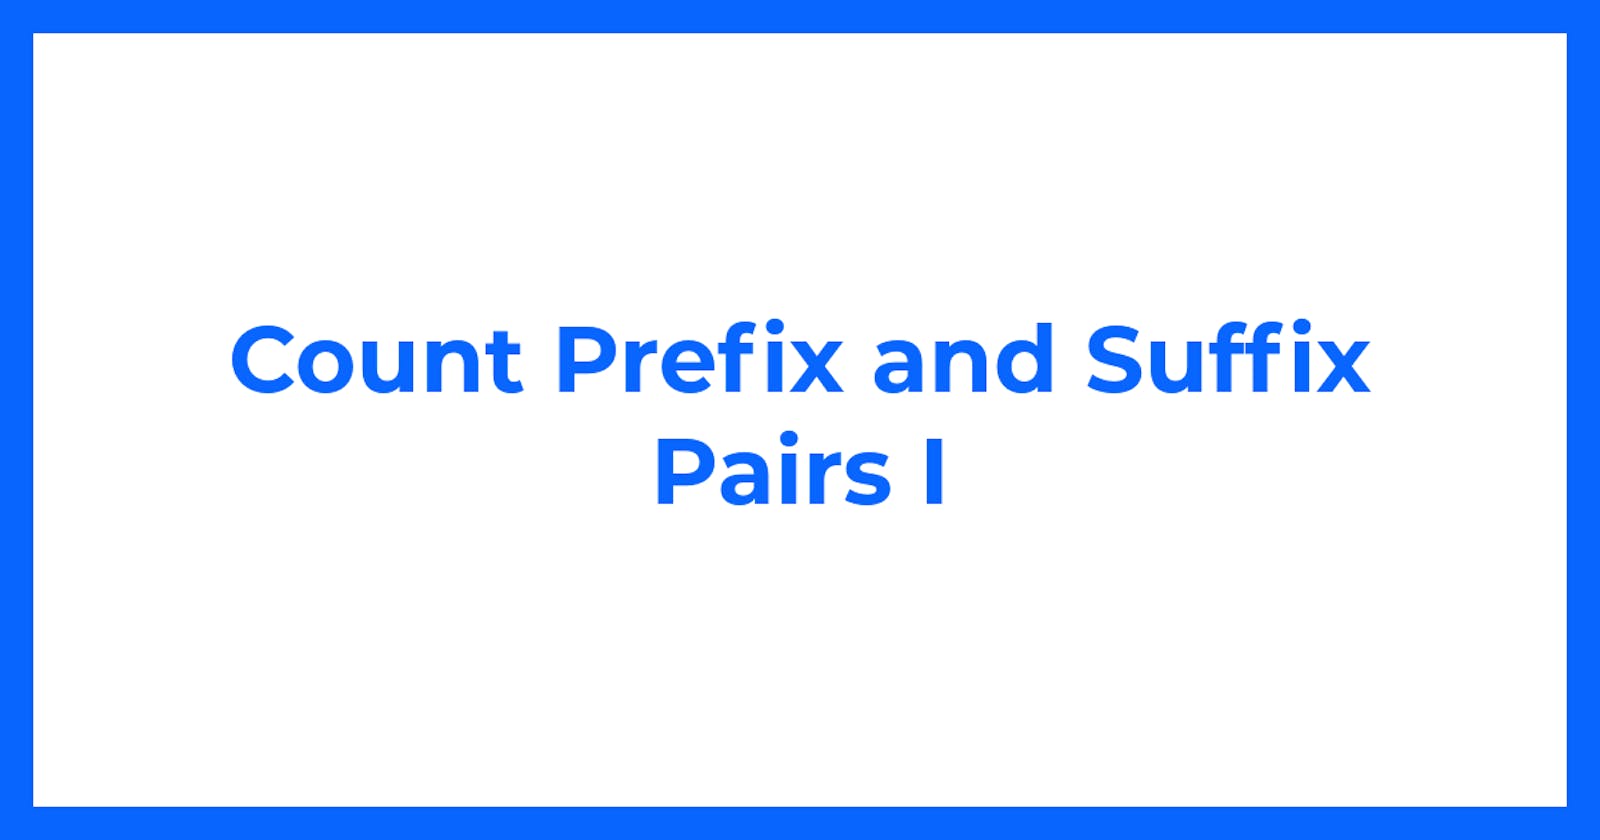 Count Prefix and Suffix Pairs I